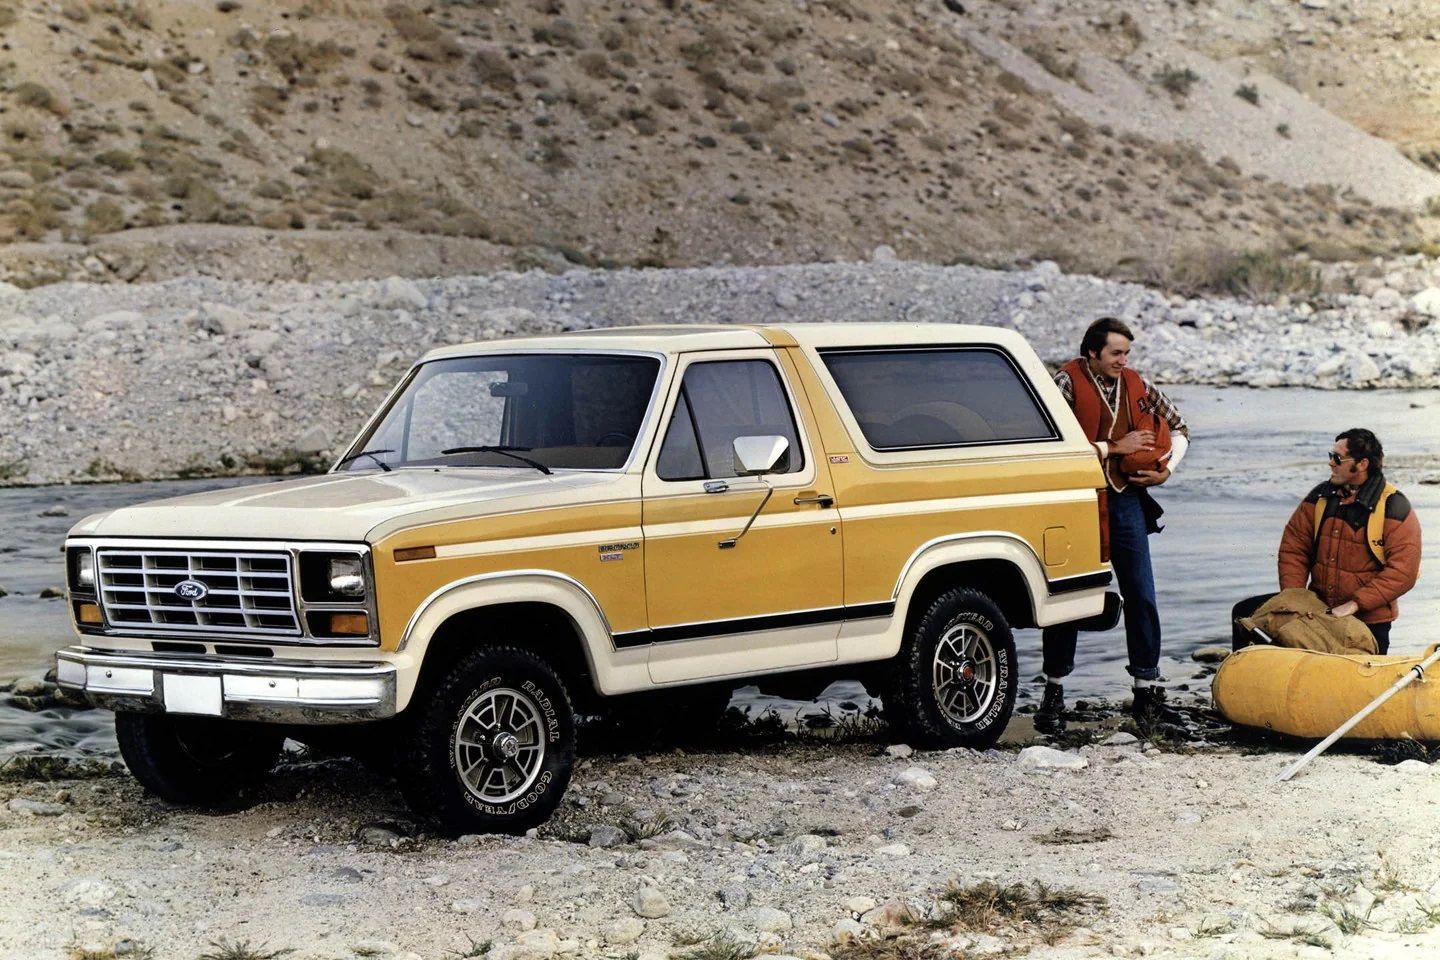 A parked third generation Ford Bronco